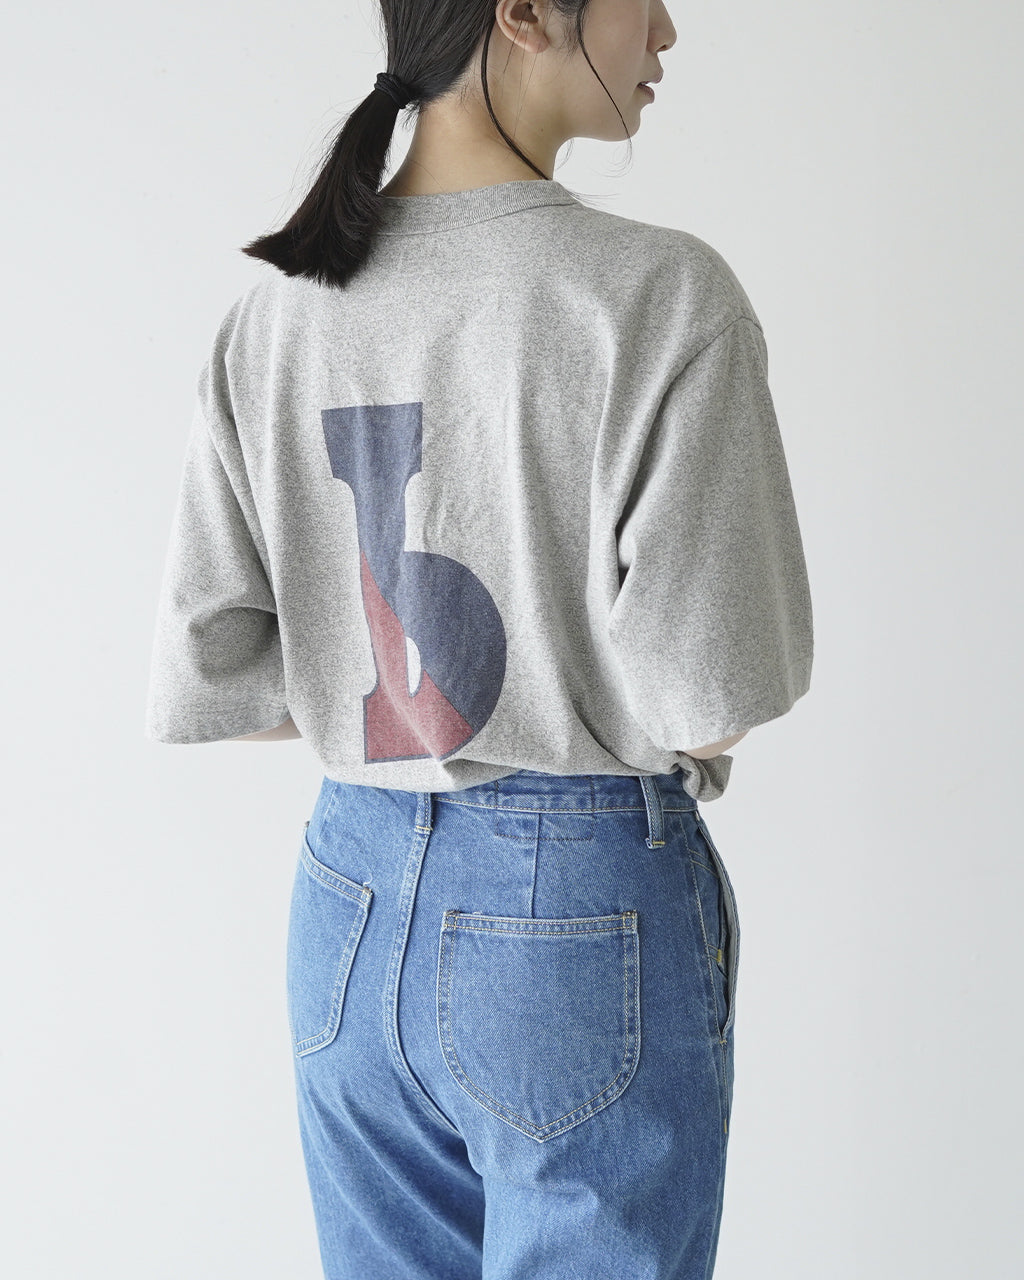 blurhms ROOTSTOCK ブラームス ルーツストック 88/12 プリント Tシャツ Cotton Rayon 88/12 Print Tee ALE-Y bROOTS23S32【送料無料】